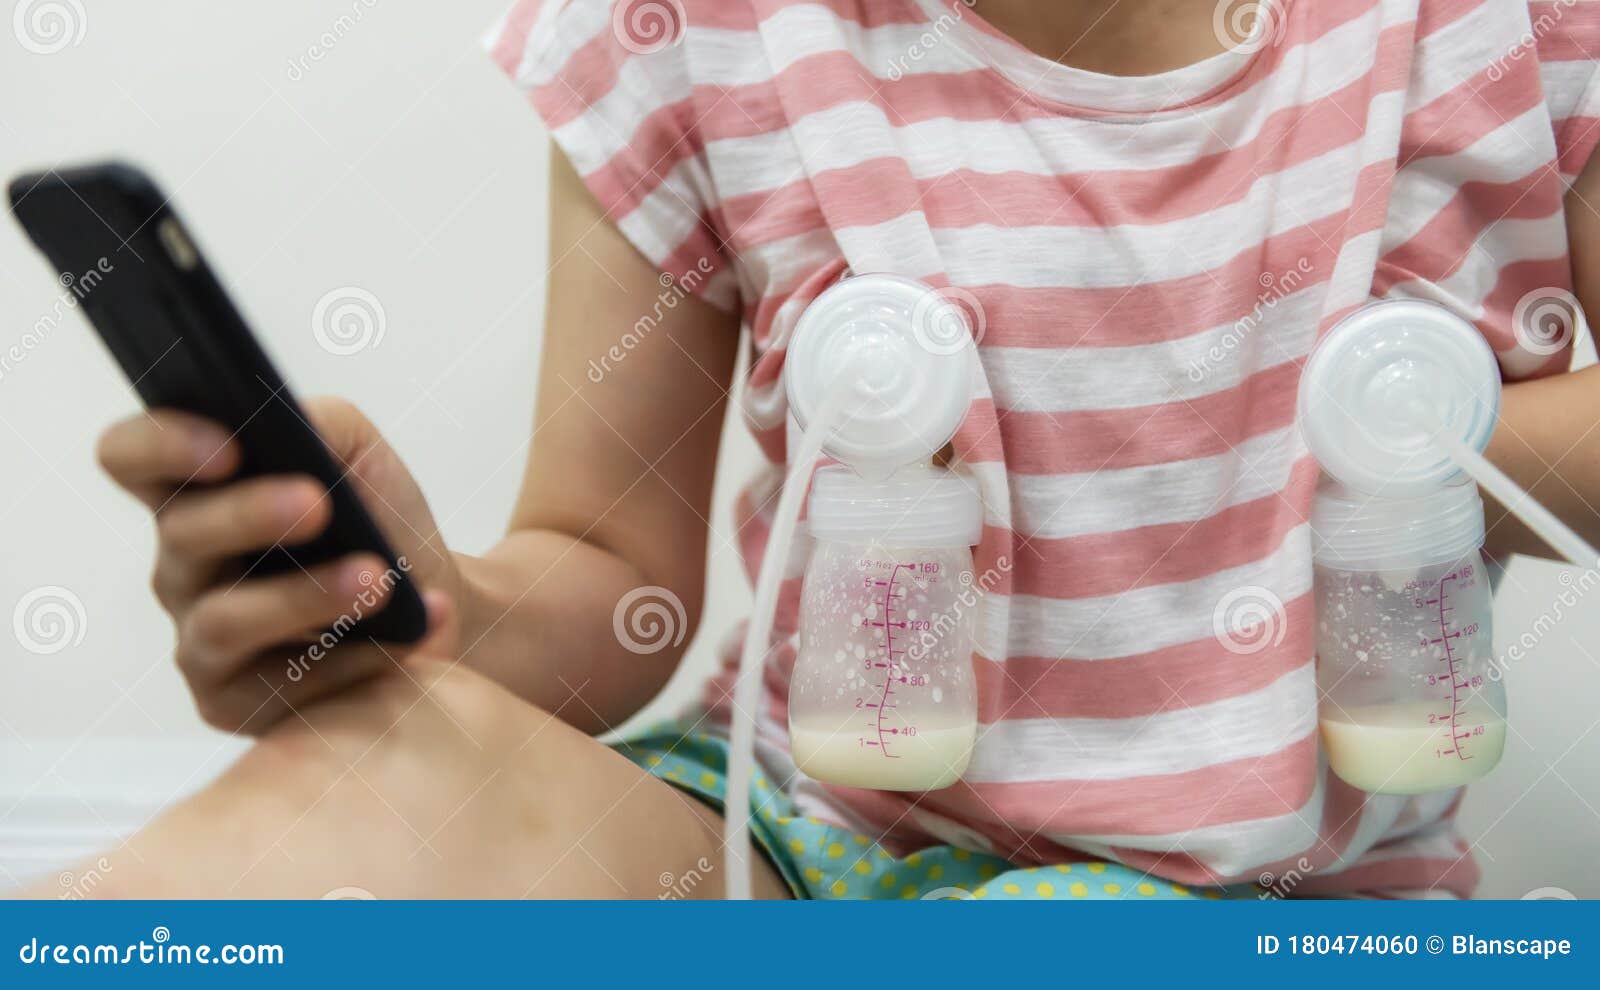 Mom Pump Breastmilk And Play Phone Stock Photo Image Of Container